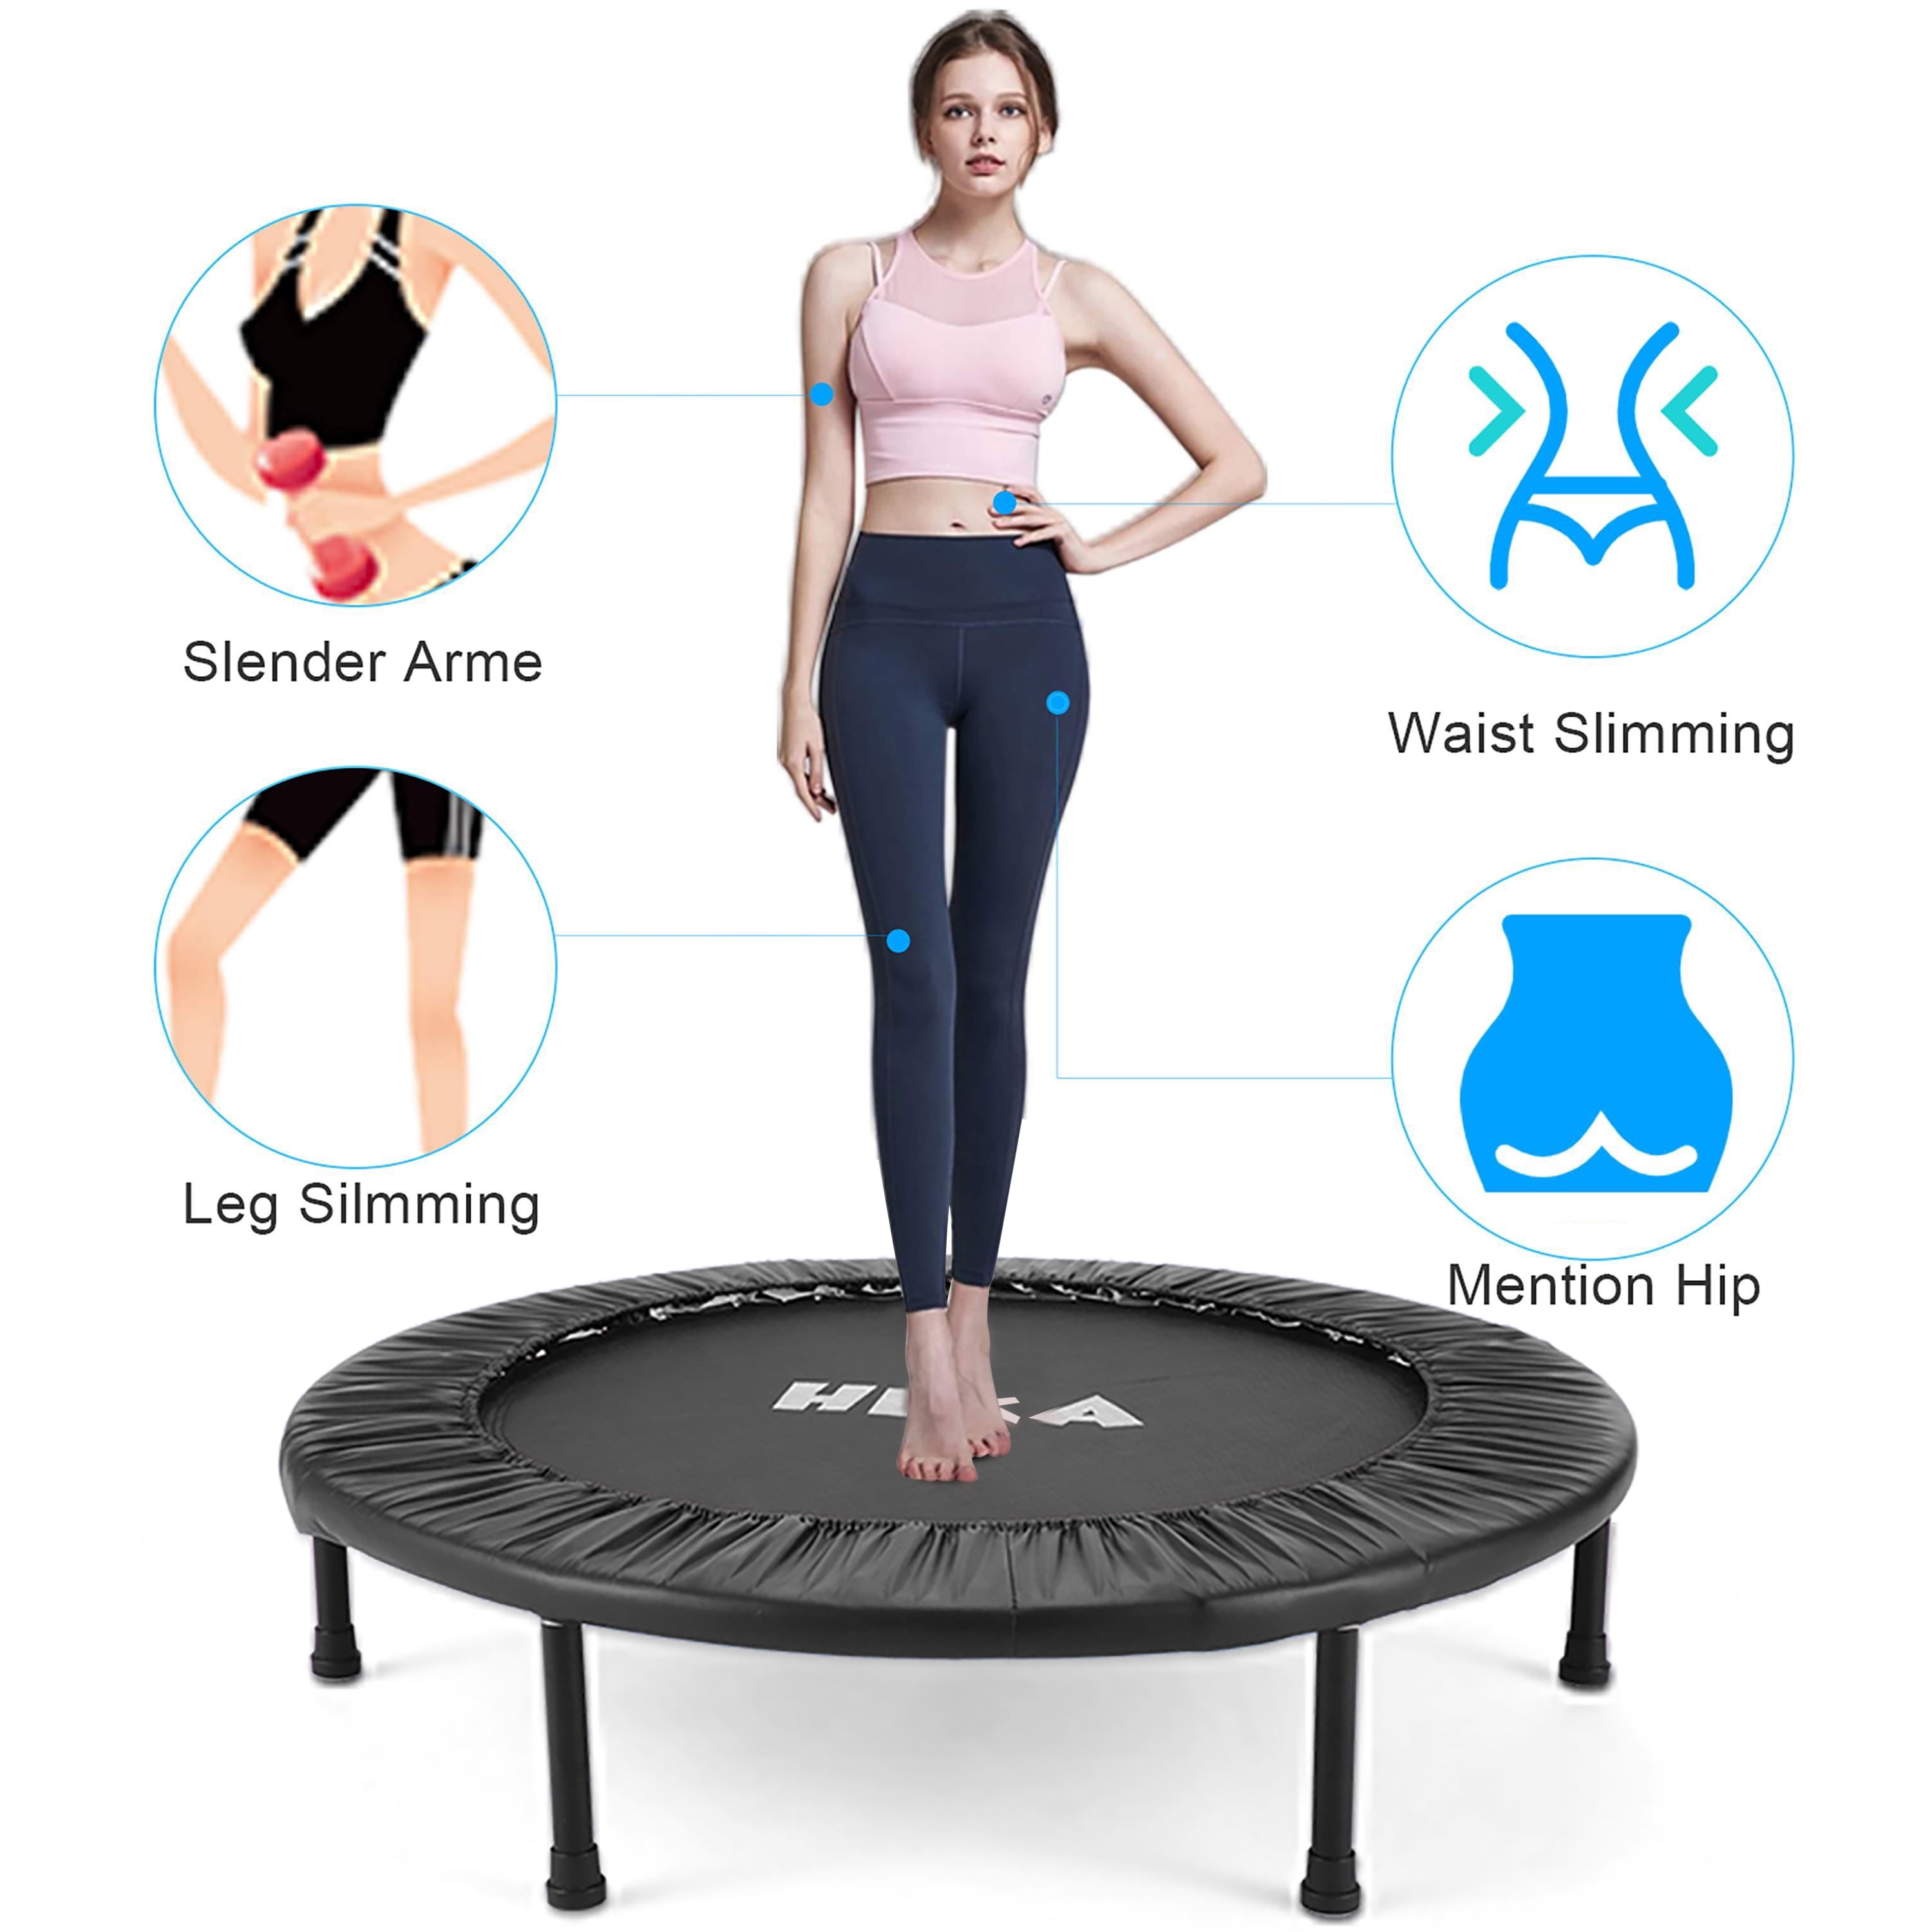 HEKA 38" Foldable Mini Fitness Trampoline for Adults Kids, Exercise Trampoline Holds 330lbs Rebounder Trampoline with Padding and Springs Elastic Safe for Indoor Outdoor Exercise Workout